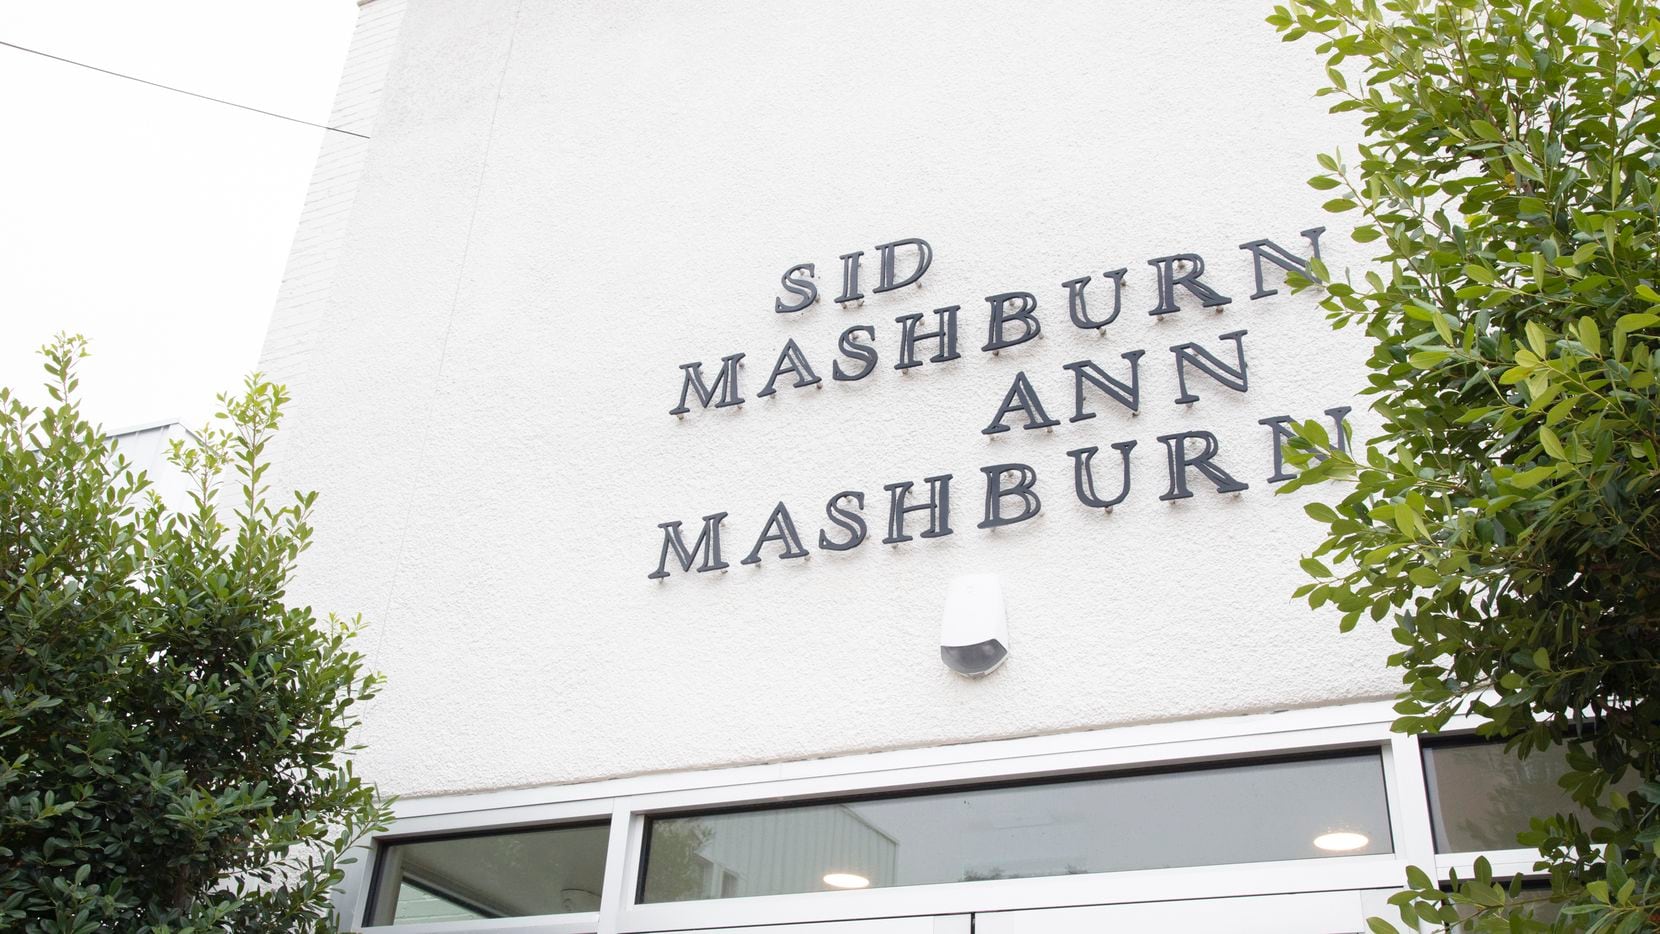 The Sid and Ann Mashburn boutique moved from Knox Street around the corner to 4615 Cole...